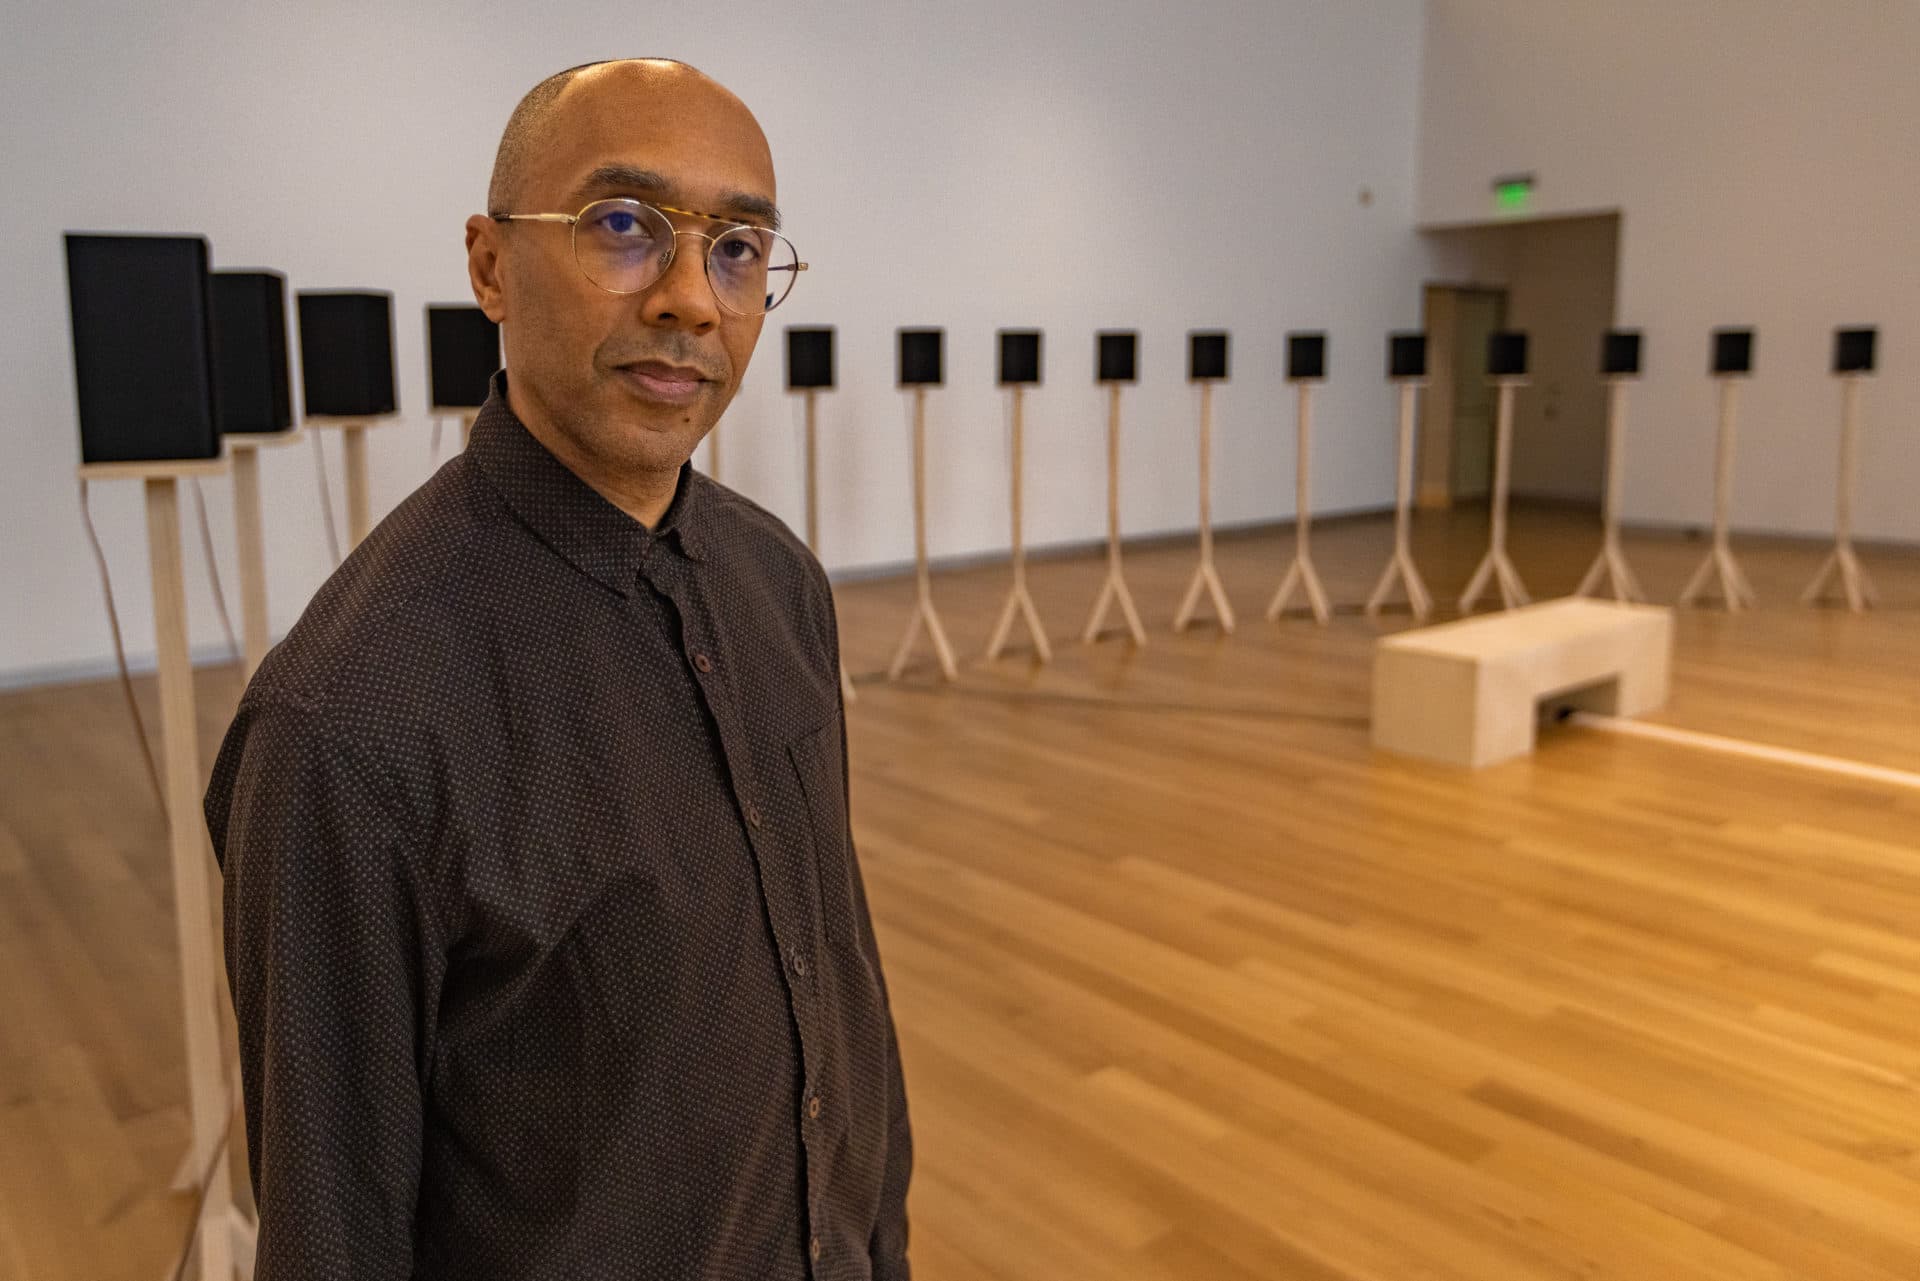 Artist Jace Clayton stands in front of a line of speakers, part of his show “They Are Part” at the MAAM. (Jesse Costa/WBUR)